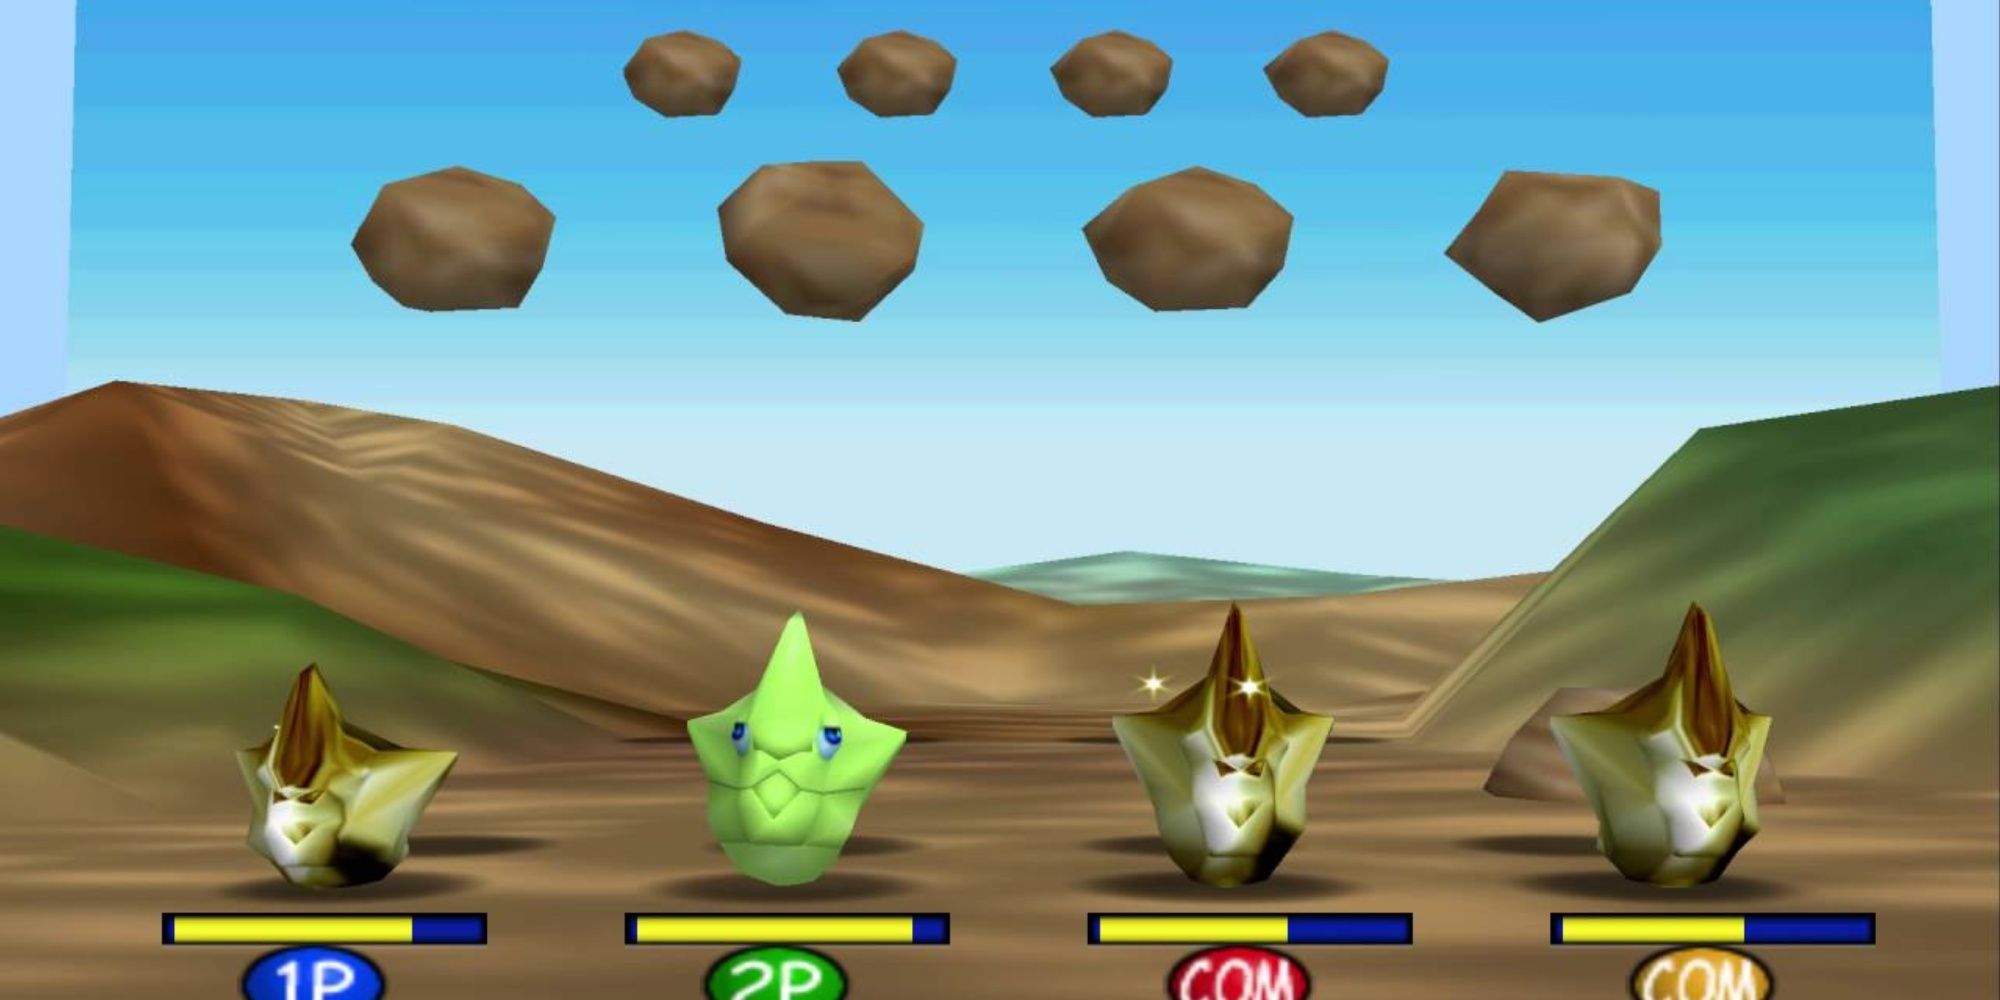 Four cocoons that are shiny with boulders flying in the air